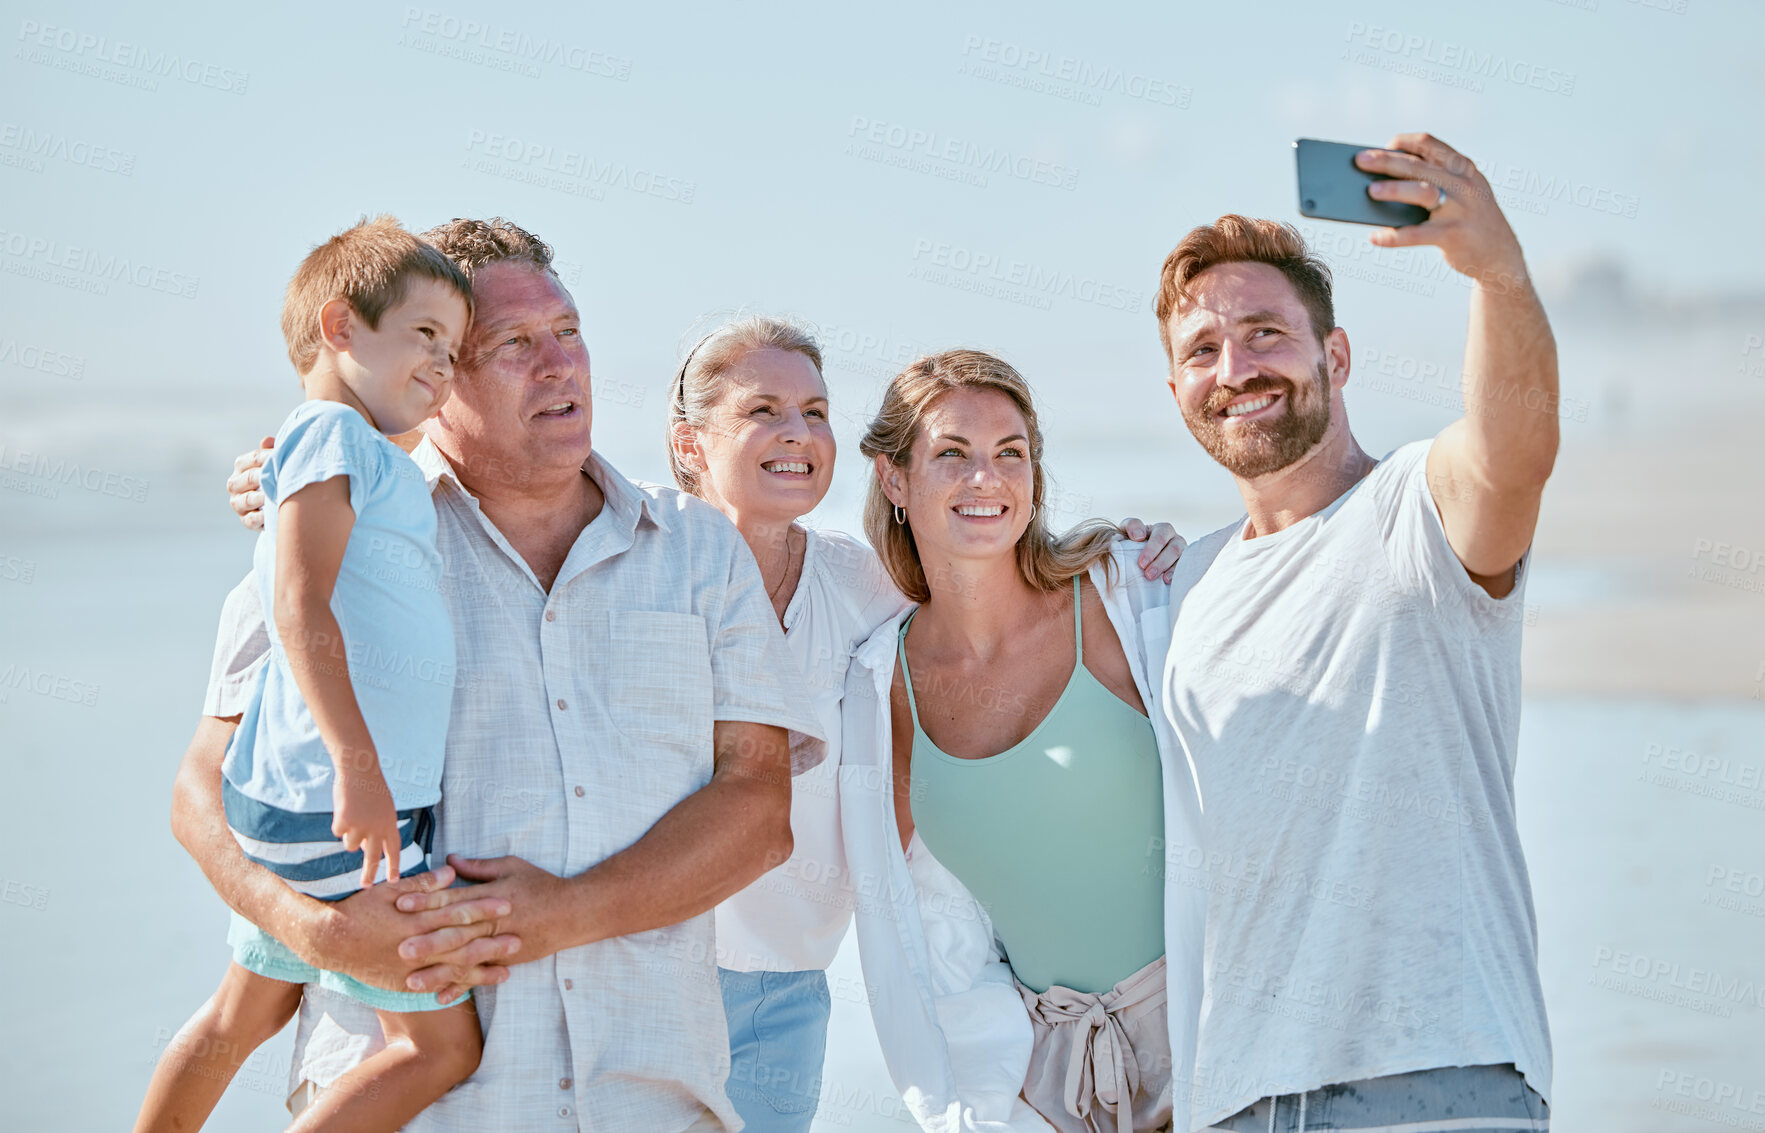 Buy stock photo Selfie, family and beach with children, parents and grandparents posing for a photograph by the sea or ocean. Love, kids and holiday with a man, woman and son taking a picture during summer vacation